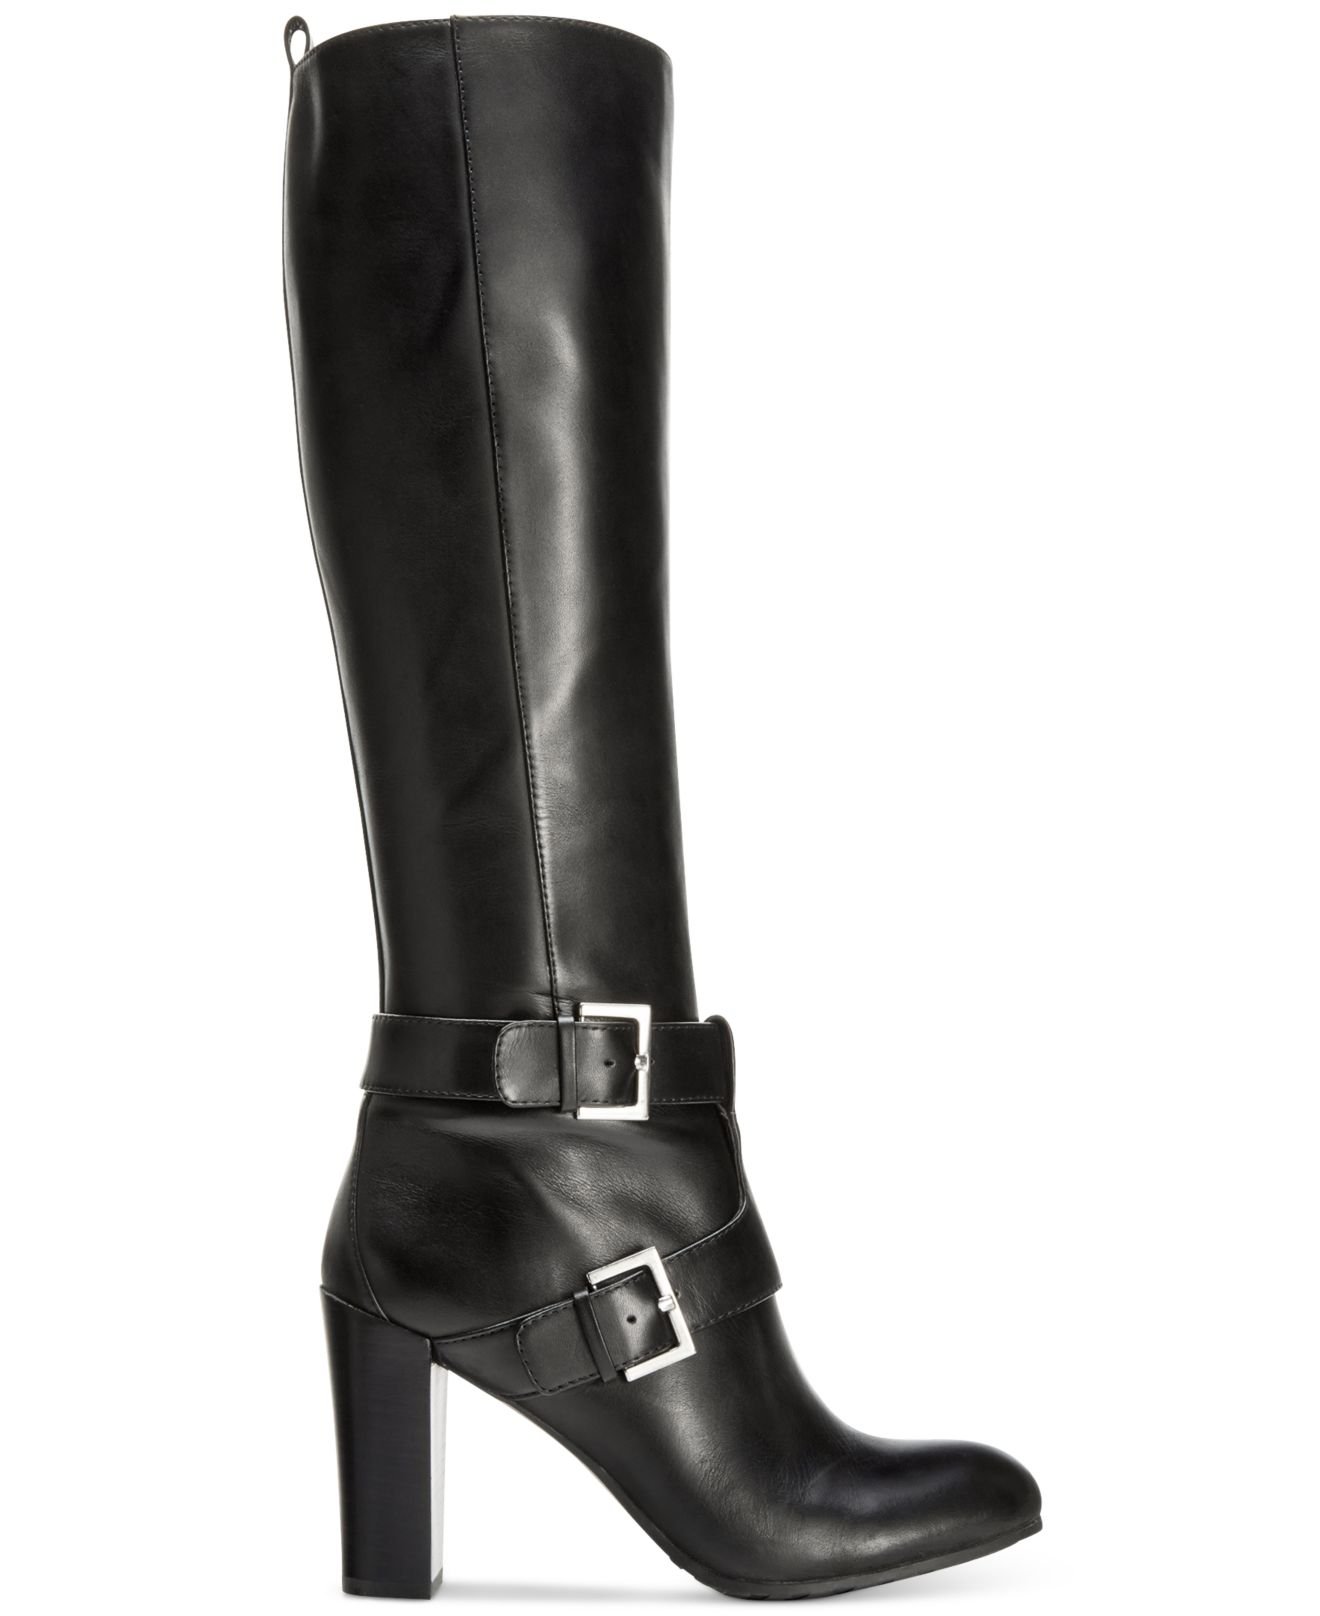 Nine west Skylight Tall Dress Boots in Black (Black Leather)